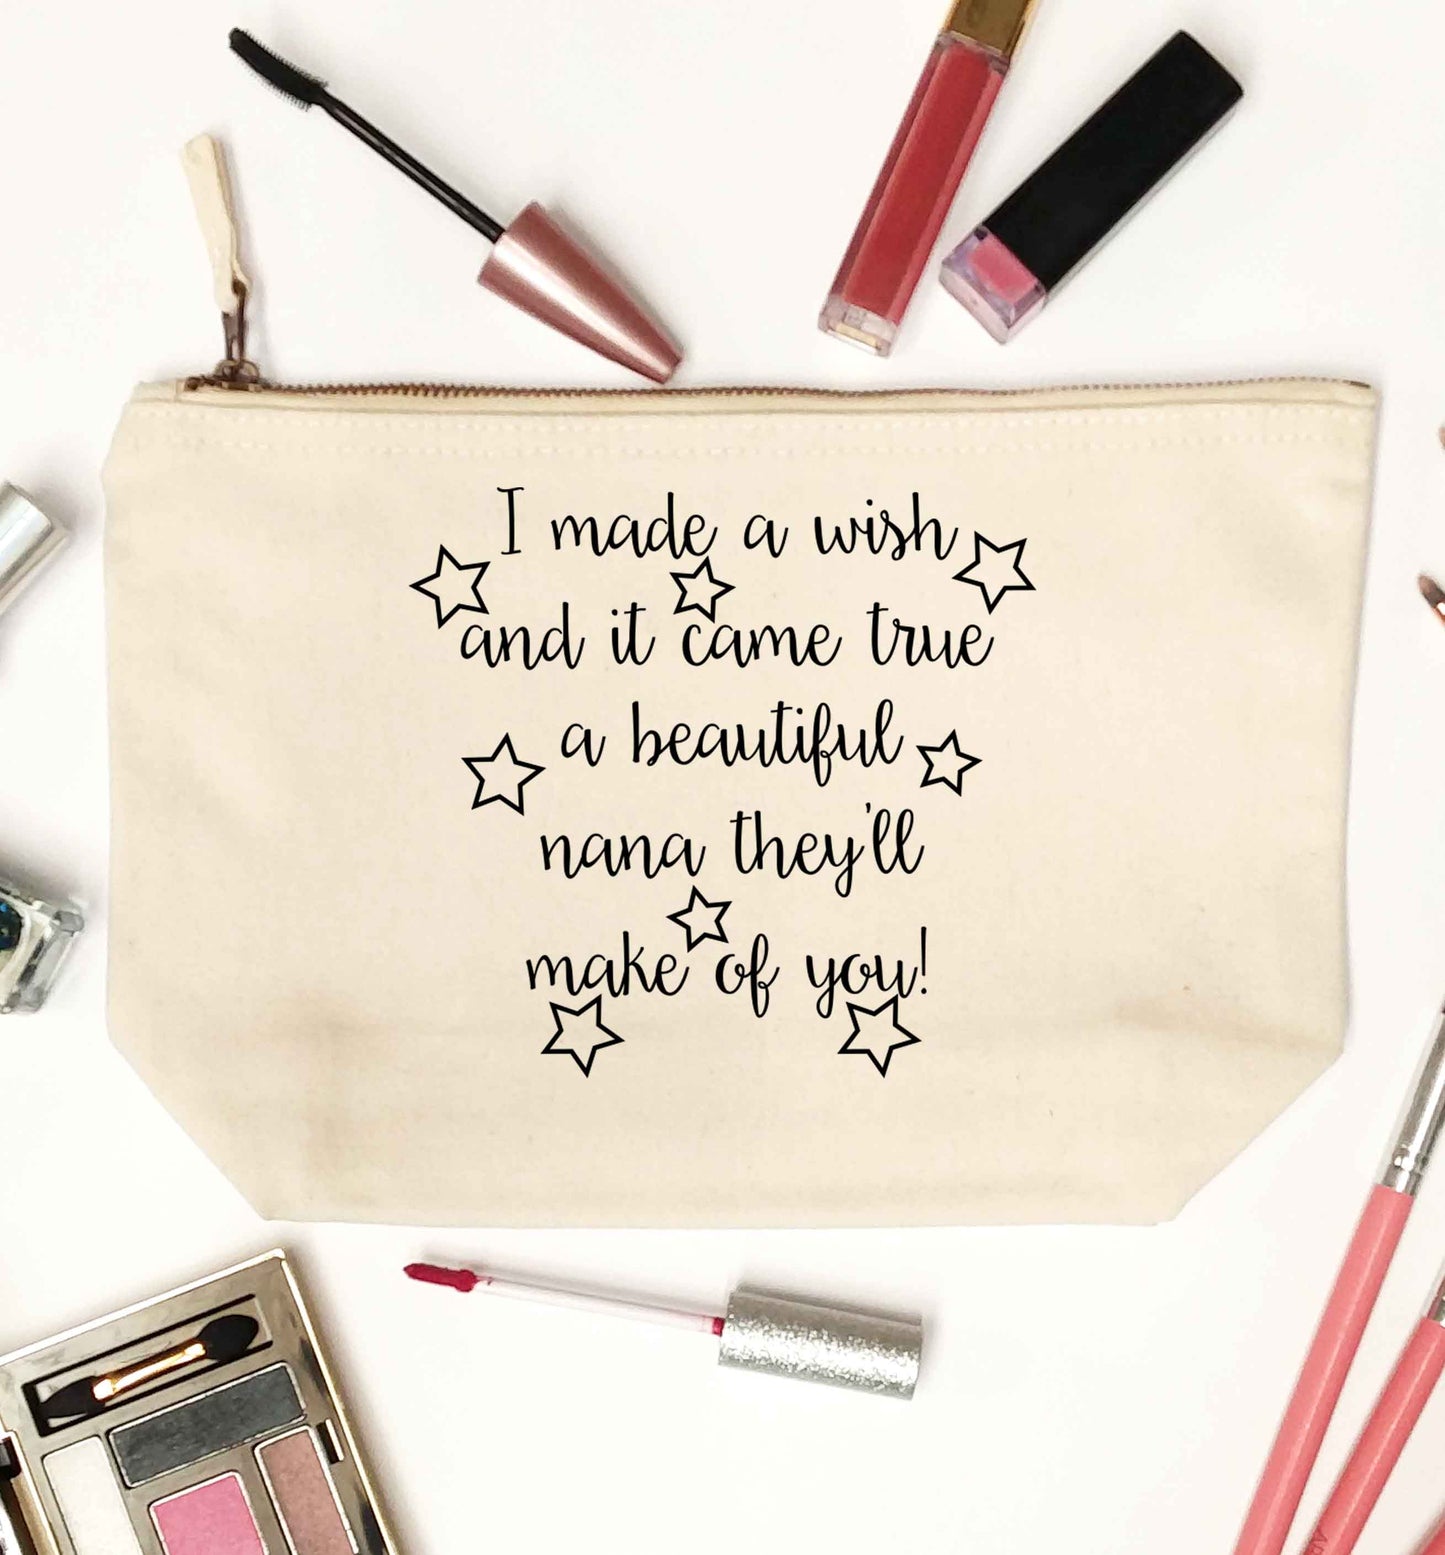 I made a wish and it came true a beautiful nana they'll make of you! natural makeup bag